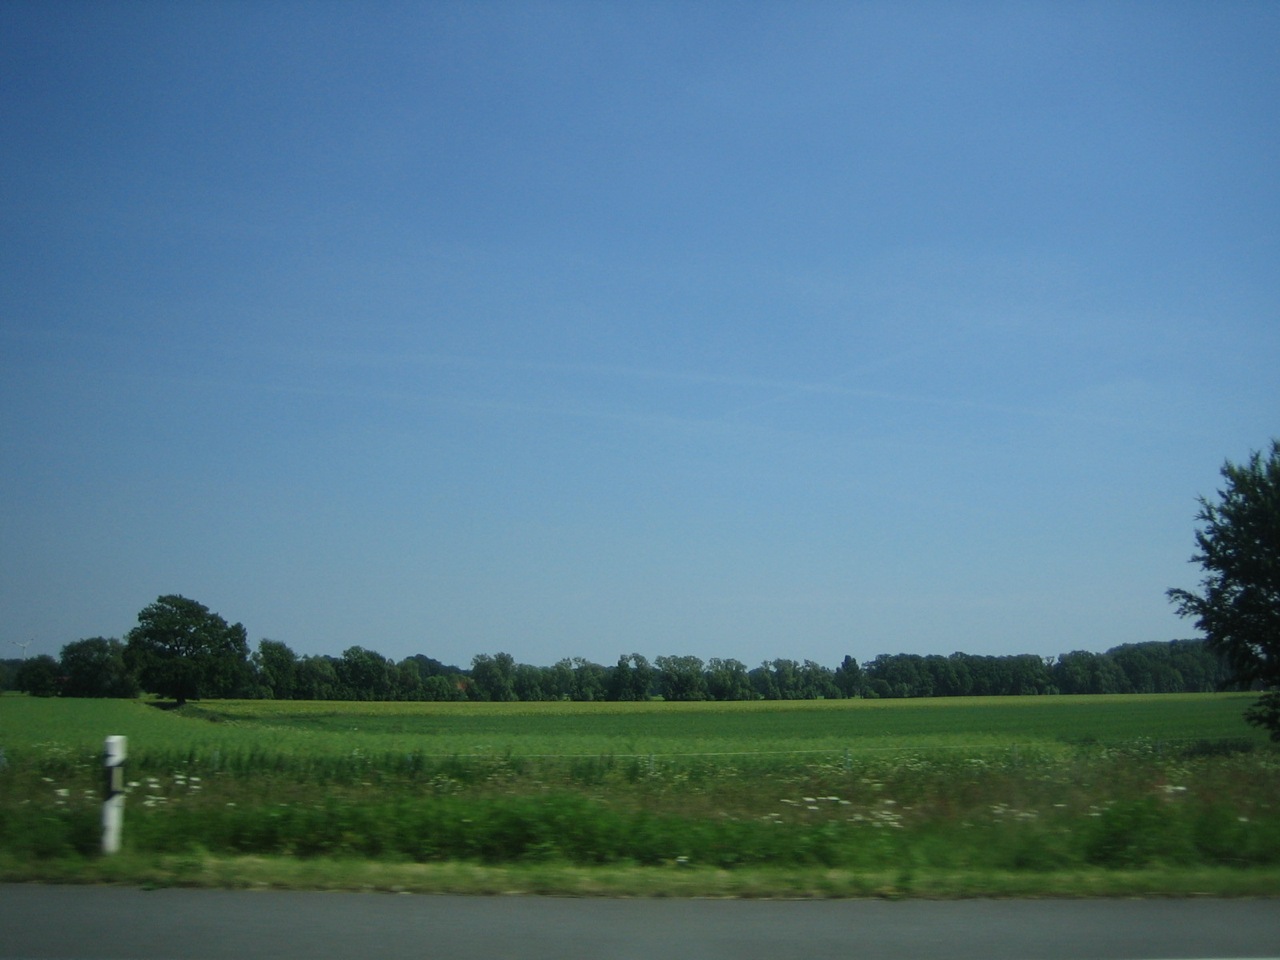 a wide open field with trees behind it